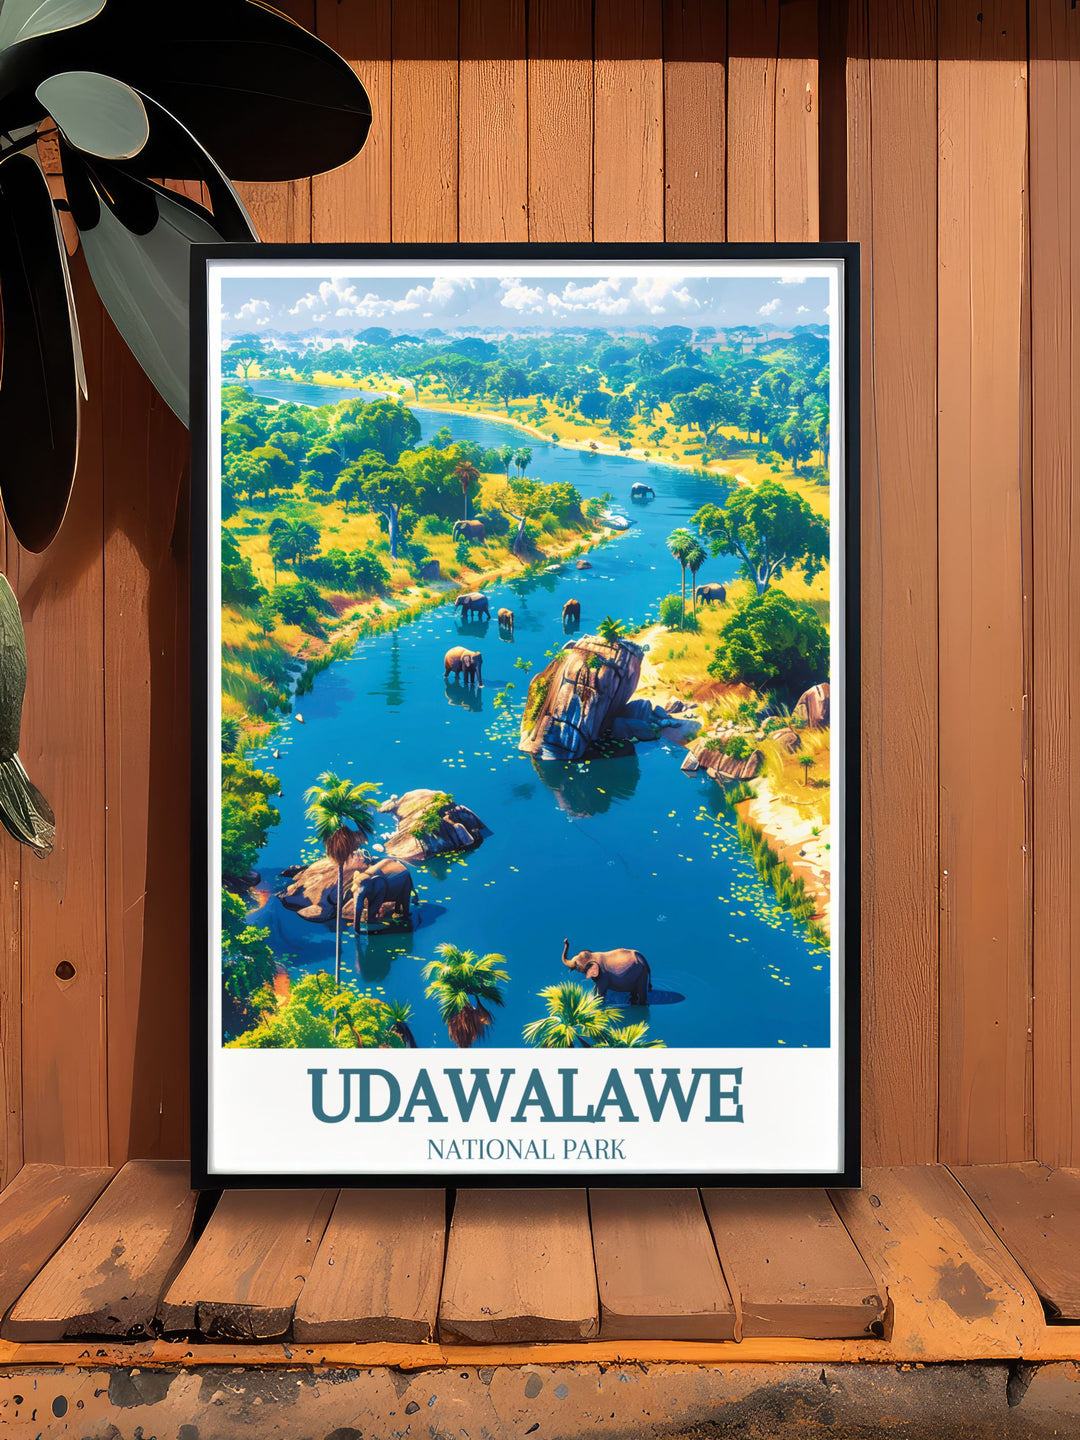 Udawalawe Reservoir Walawe River poster showcasing the tranquility and natural beauty of one of Sri Lankas most beloved national parks perfect for adding a touch of serenity and adventure to your living space.